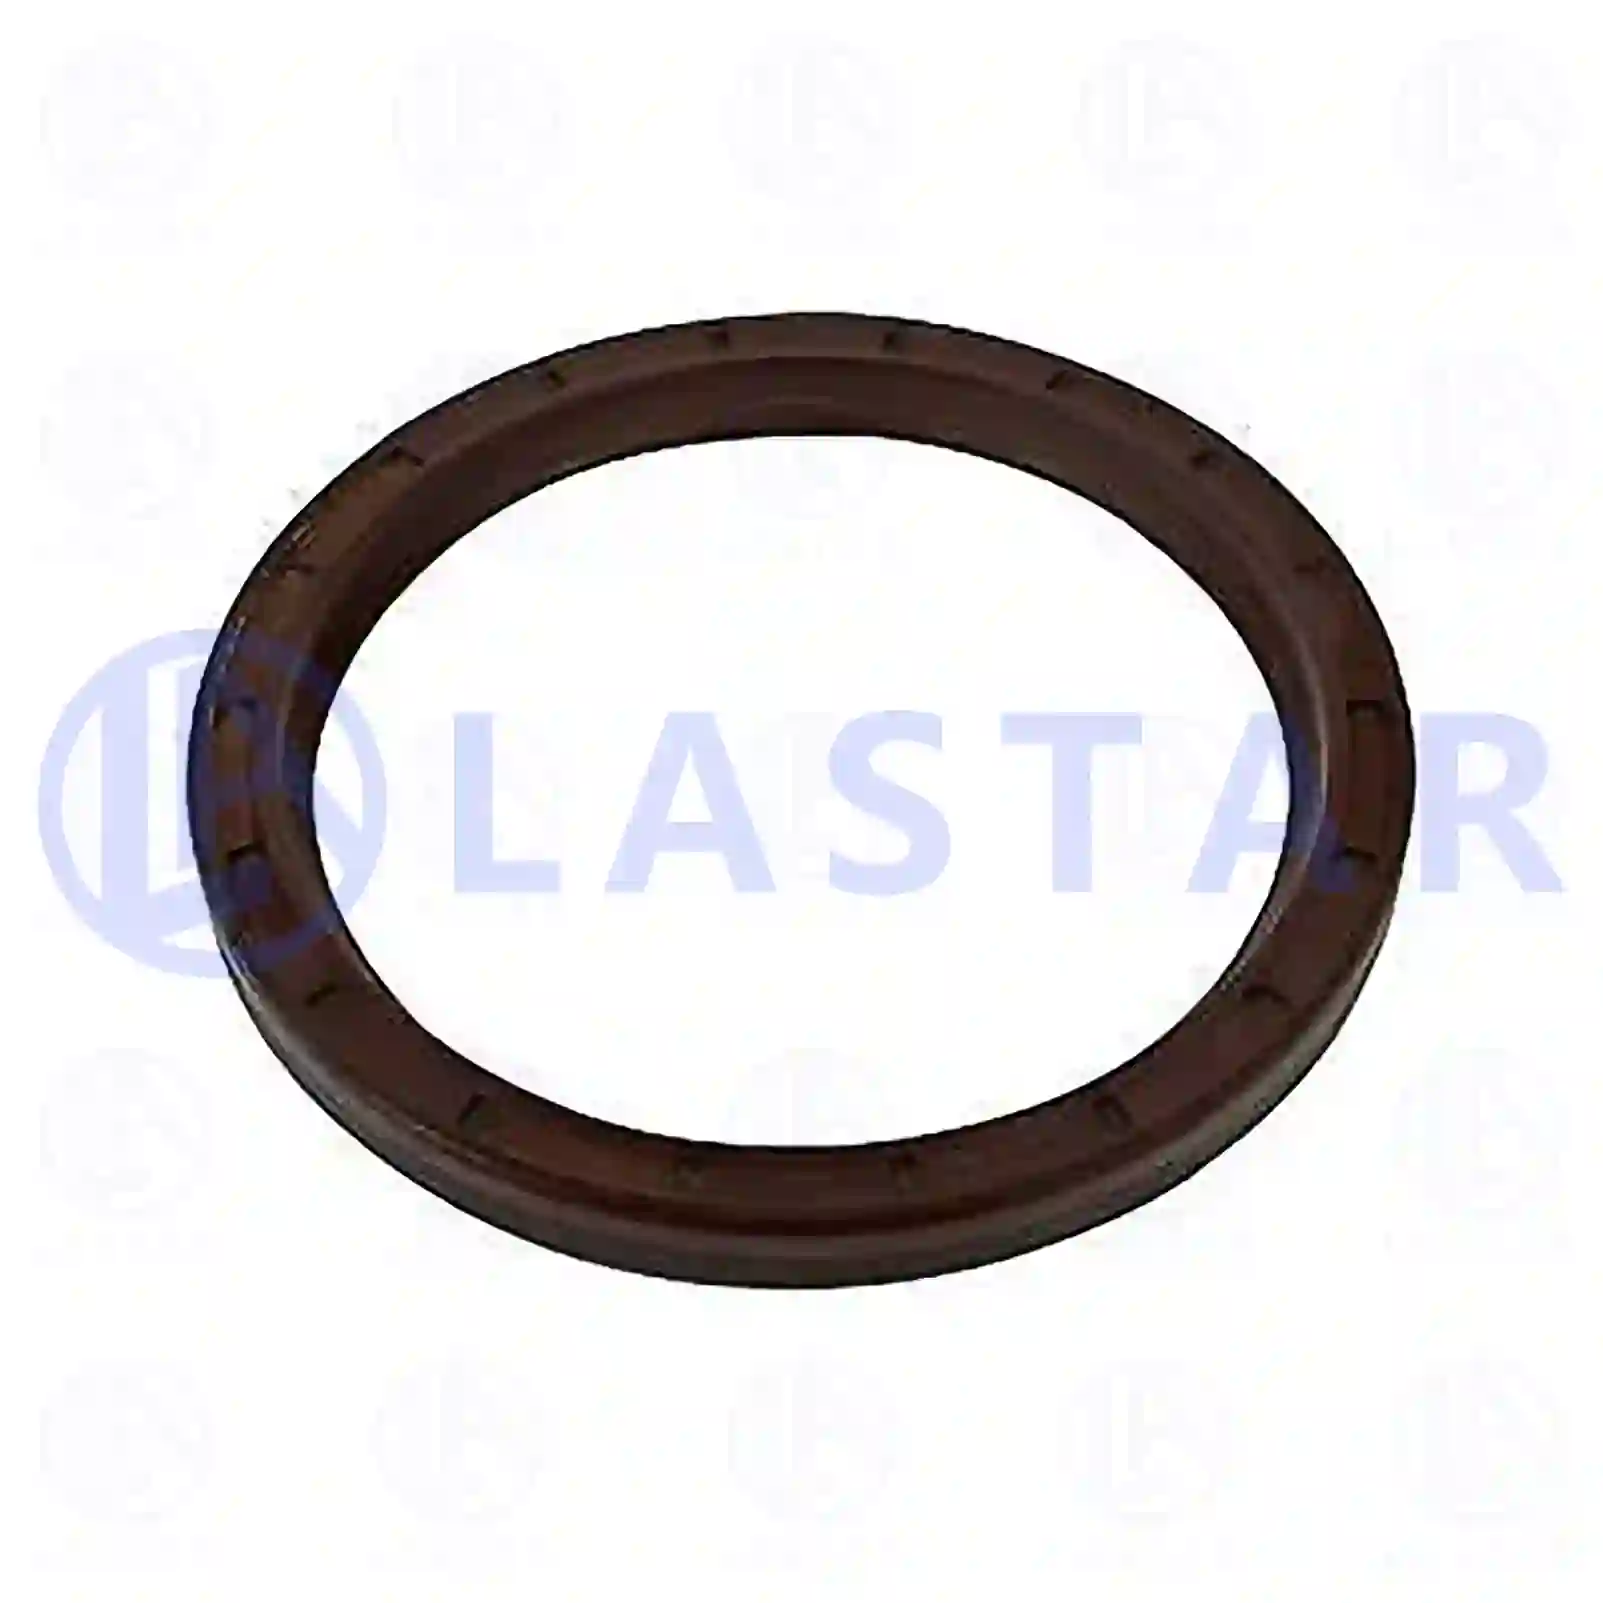 Oil seal, 77732133, 0099972047, 0179976747, 1669618, ||  77732133 Lastar Spare Part | Truck Spare Parts, Auotomotive Spare Parts Oil seal, 77732133, 0099972047, 0179976747, 1669618, ||  77732133 Lastar Spare Part | Truck Spare Parts, Auotomotive Spare Parts